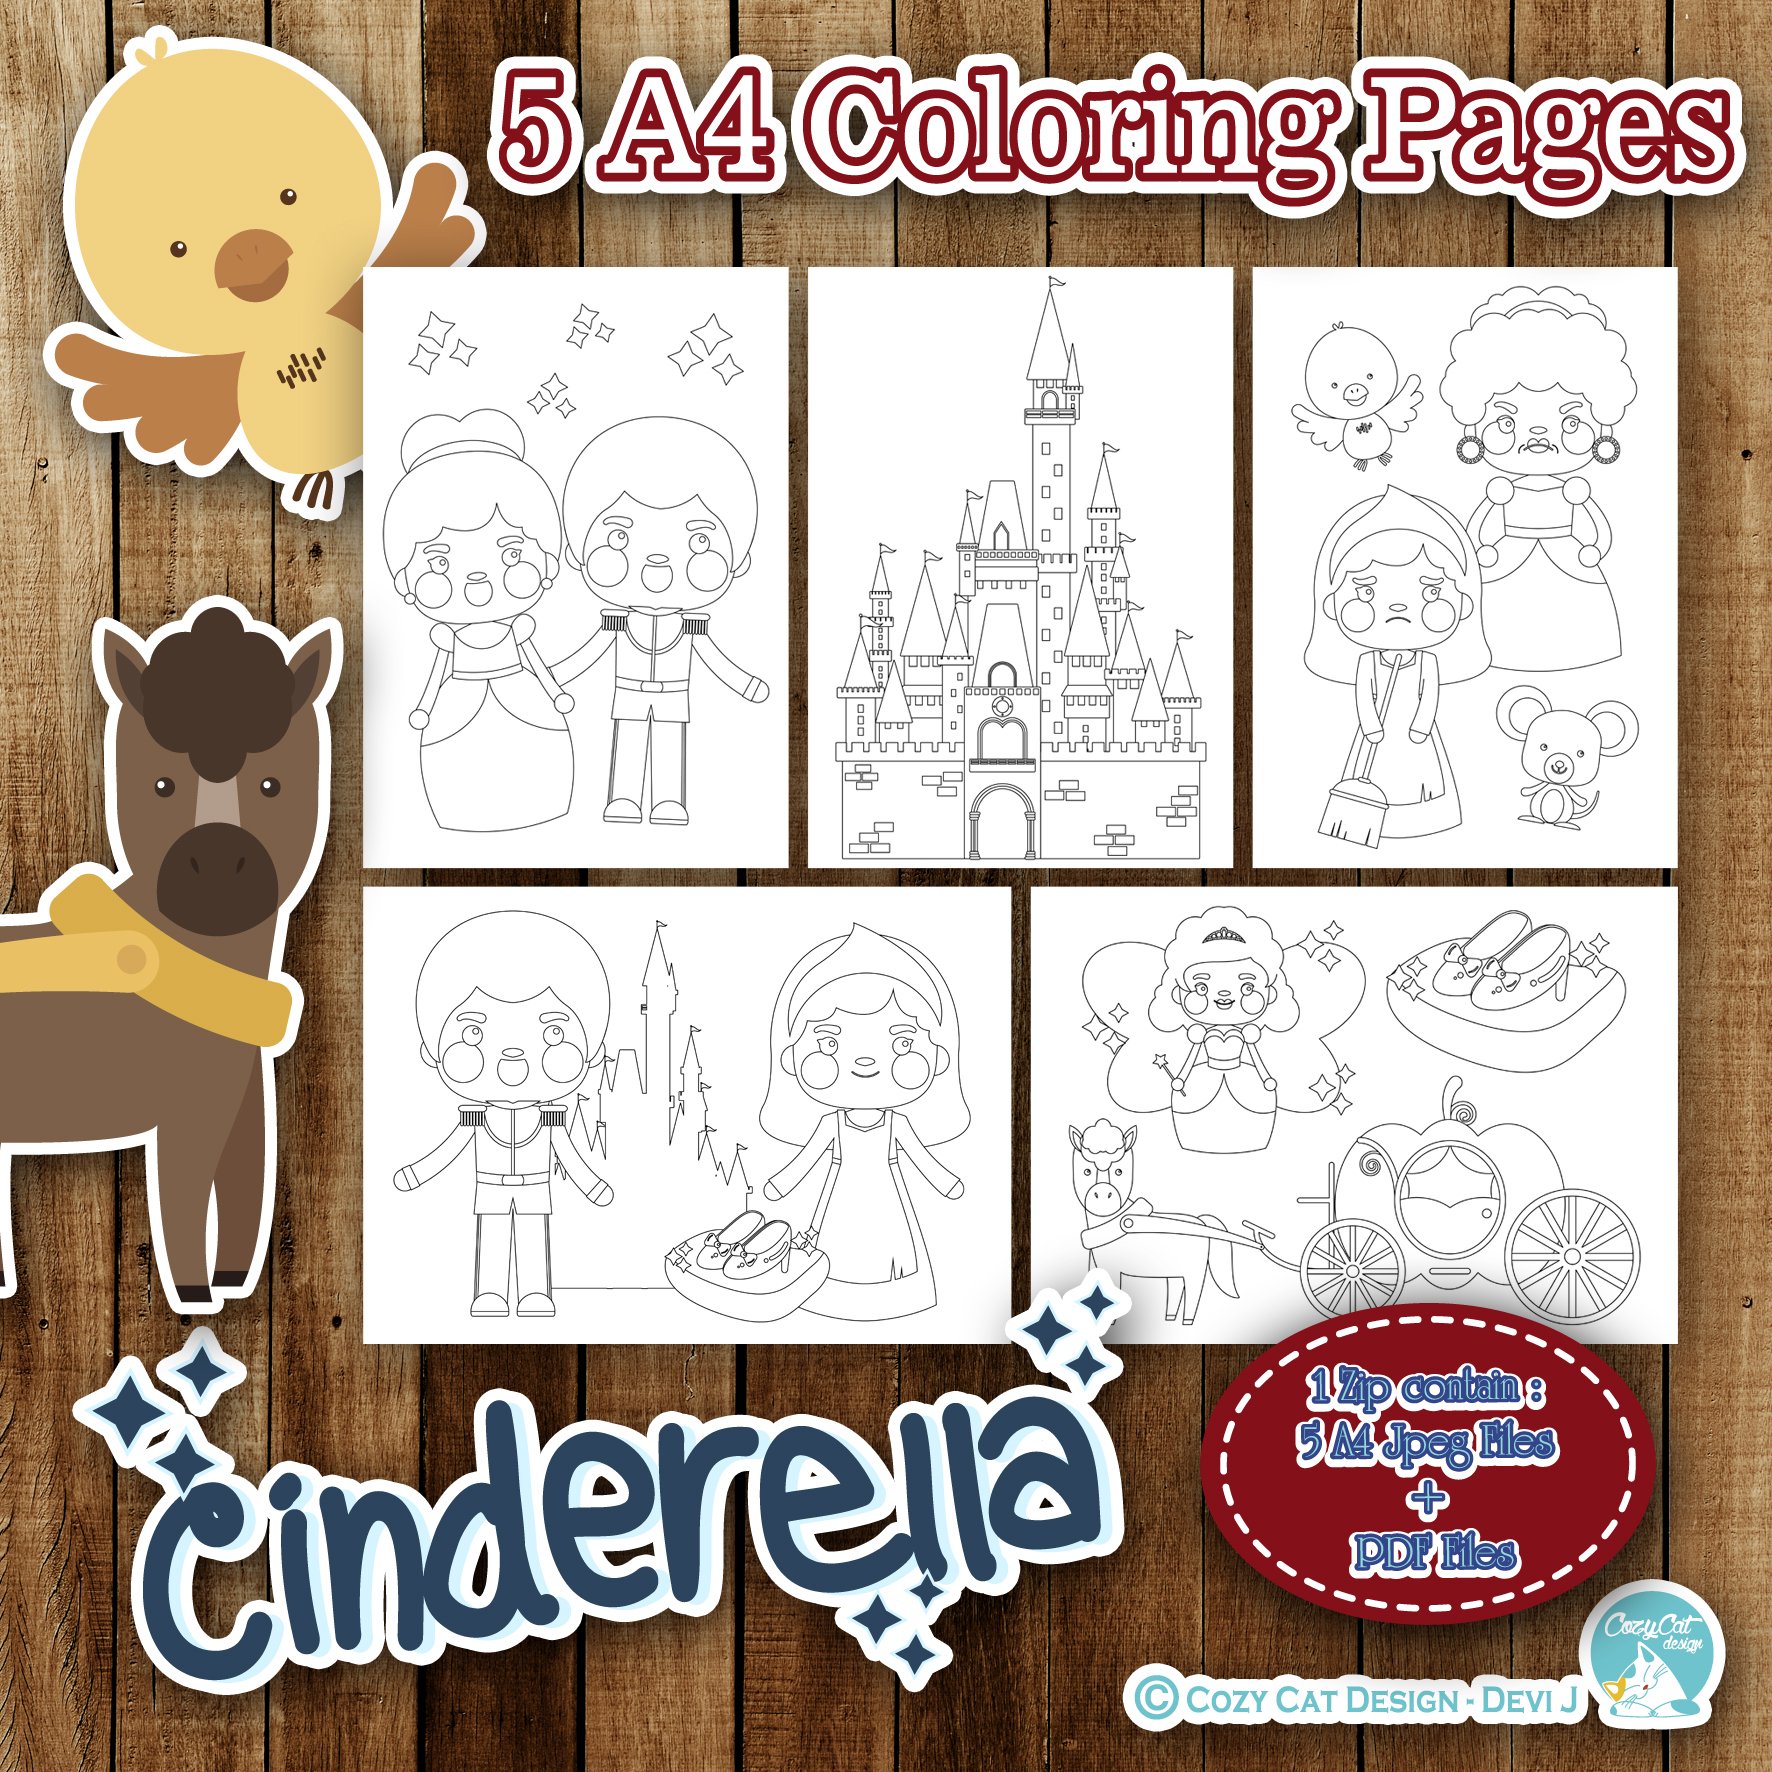 Cute Cinderella Coloring Pages cover image.